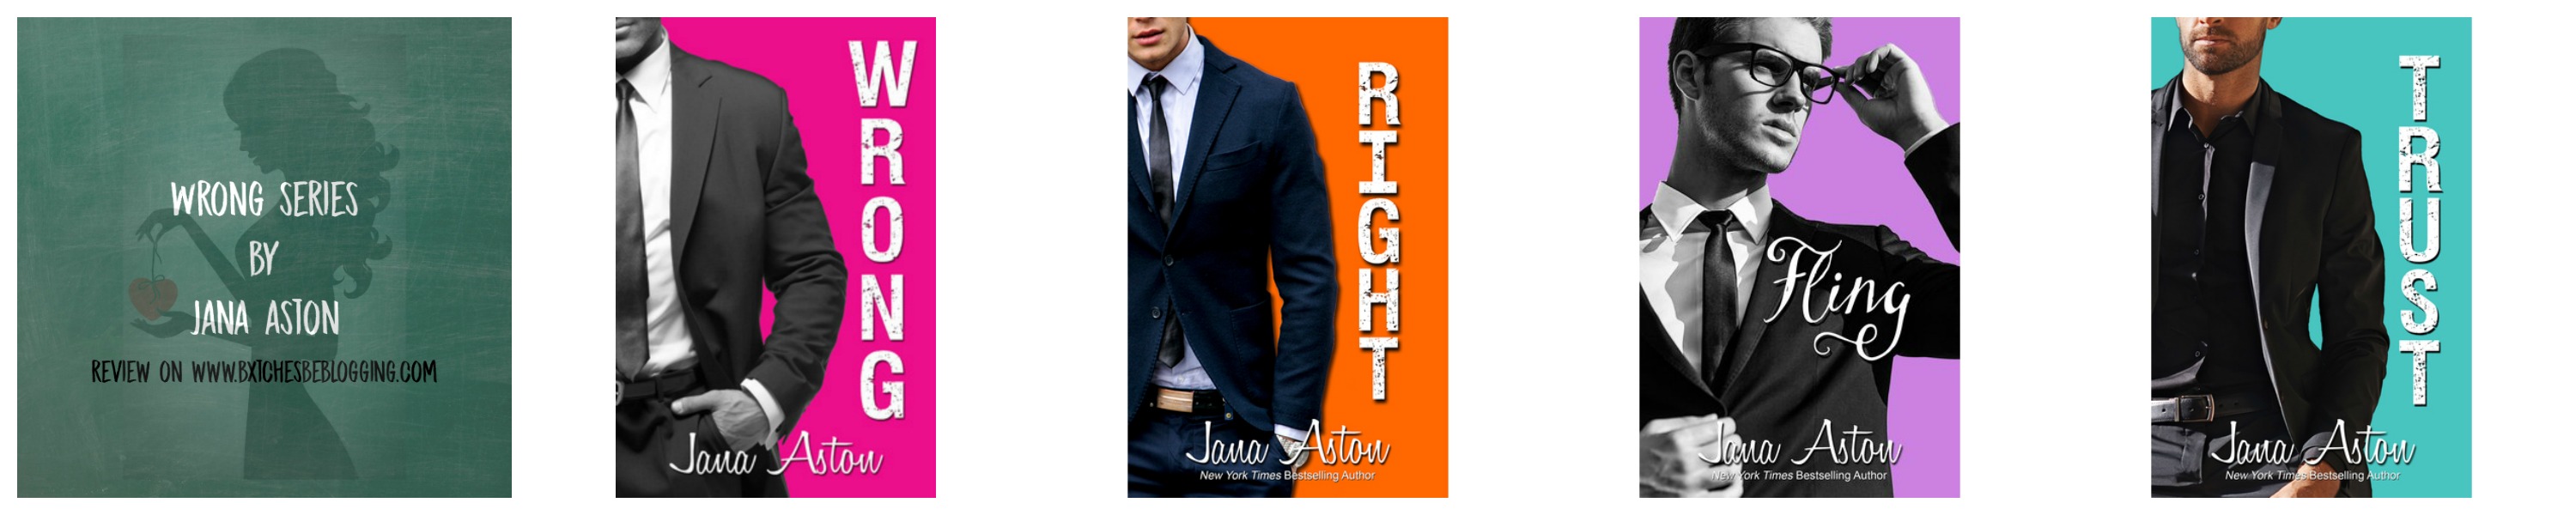 Wrong Series by Jana Aston | Review on www.bxtchesbeblogging.com